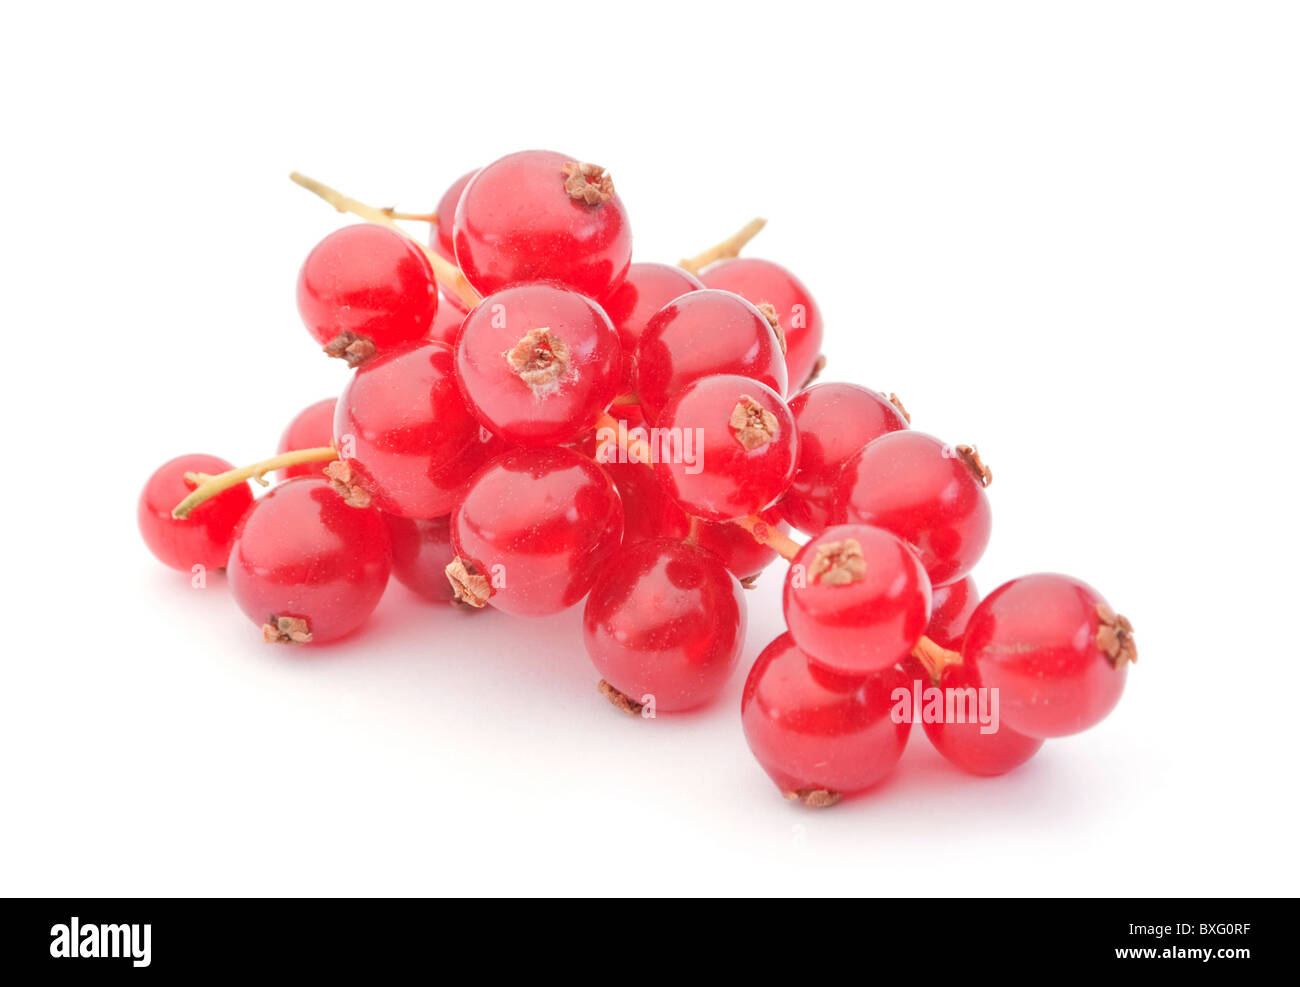 Red currant berry Stock Photo